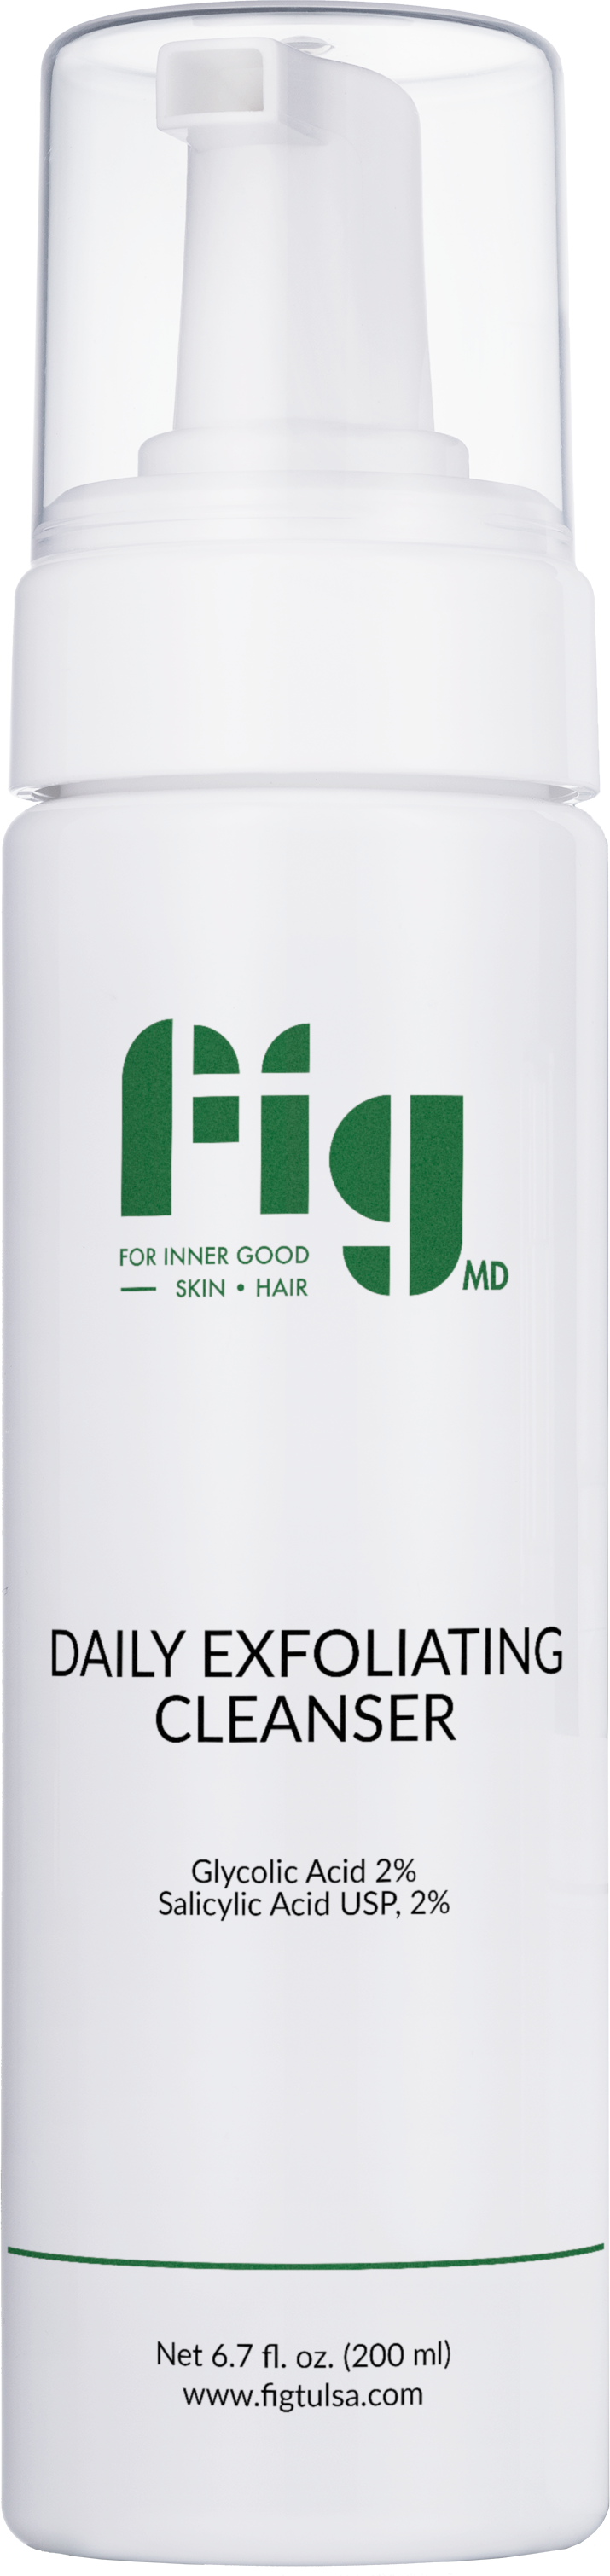 Fig MD Daily Exfoliating Cleanser